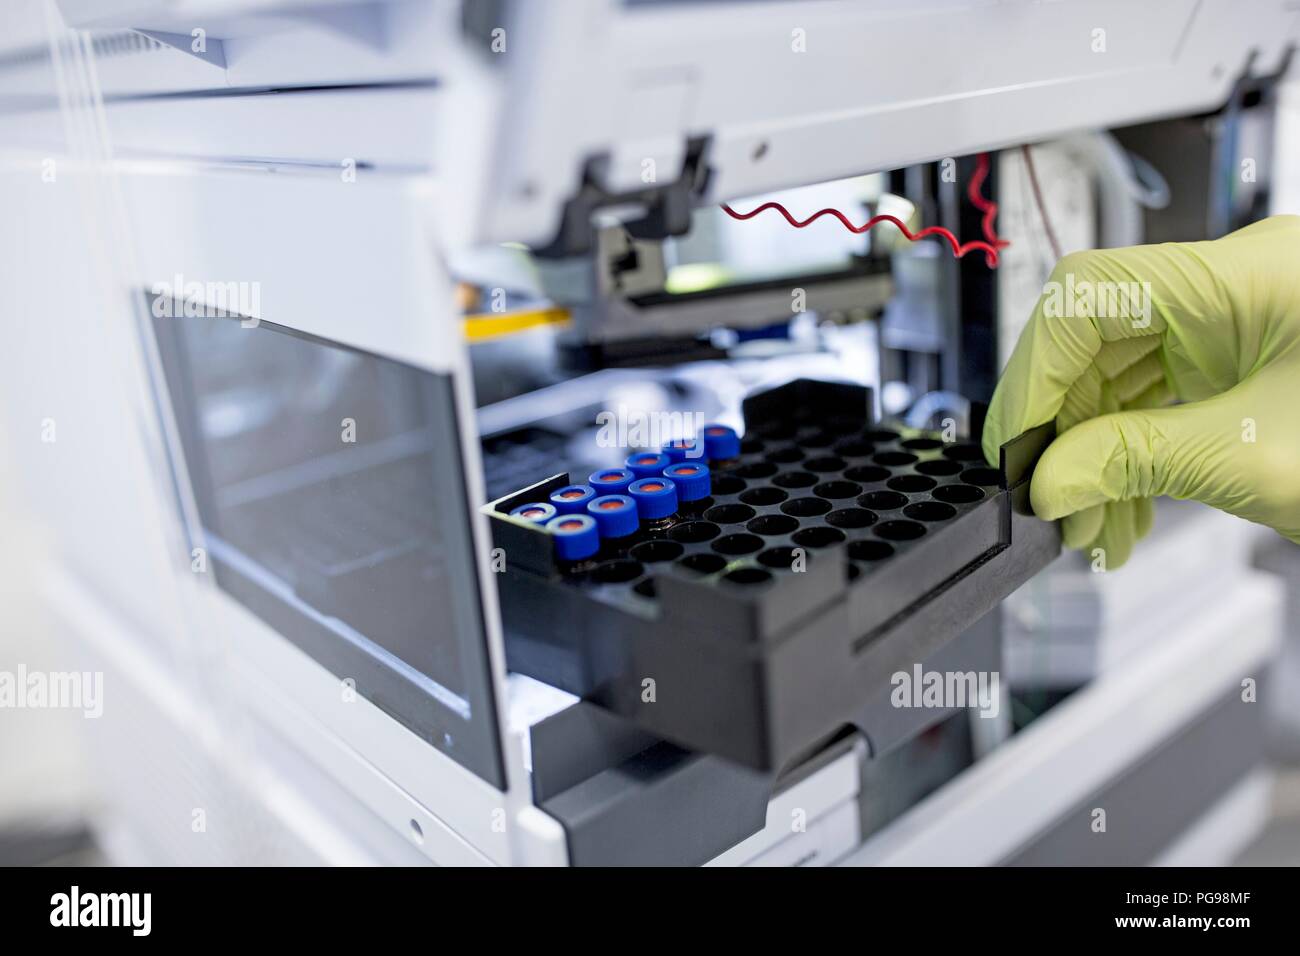 Samples being placed in a concentrator. This device concentrates or evaporates samples of biological material to prepare them for analysis. Stock Photo